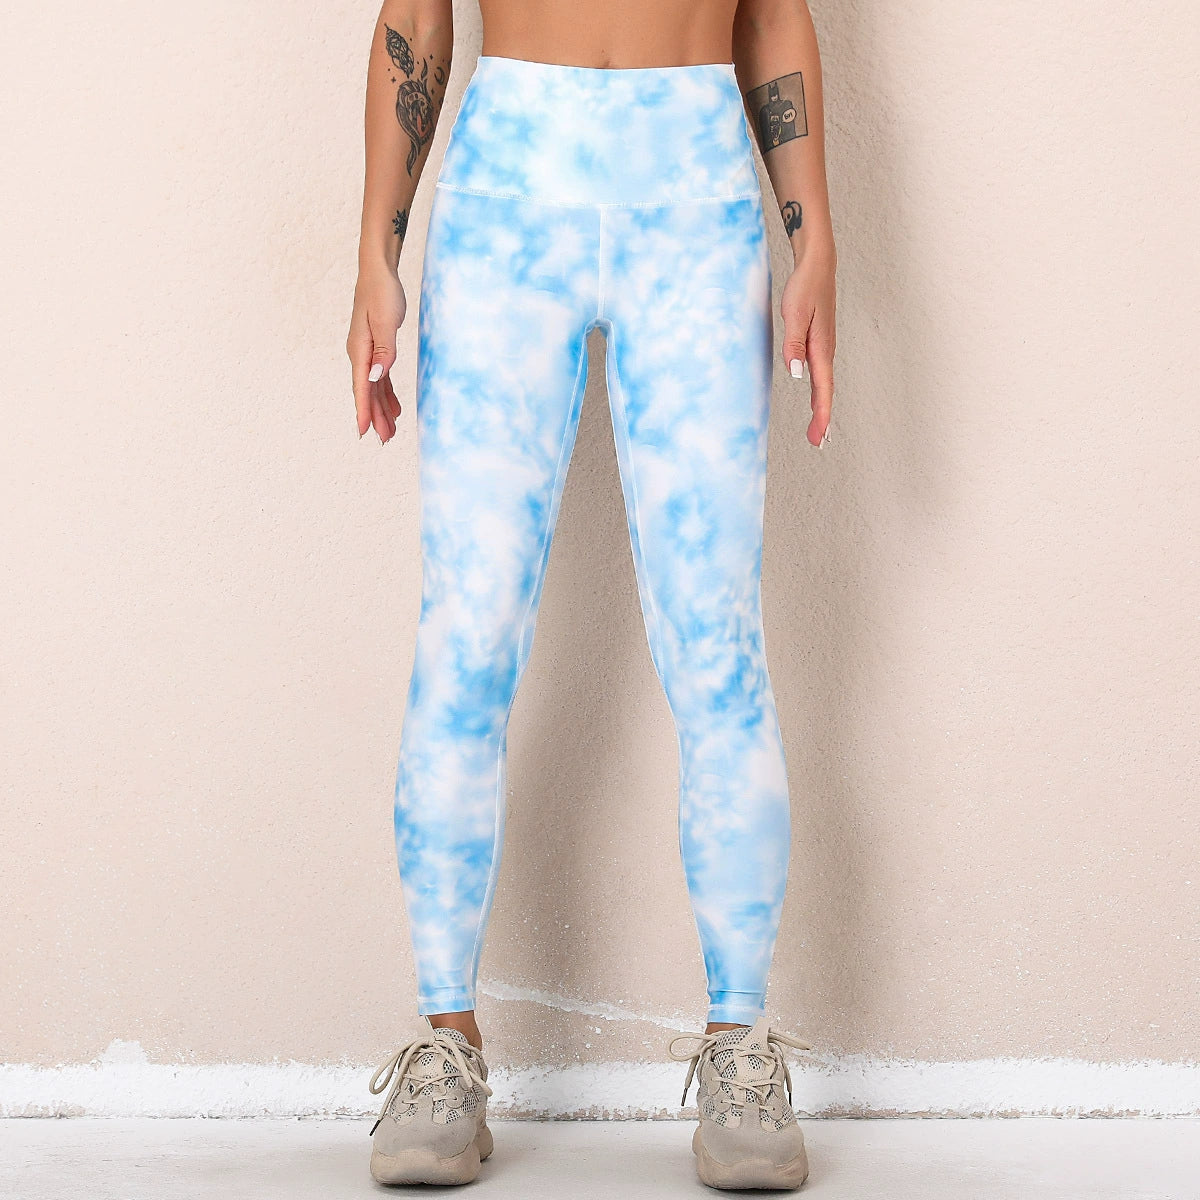 Fashion Tie-Dyed Yoga Pants for Women: Stylish Fitness Apparel